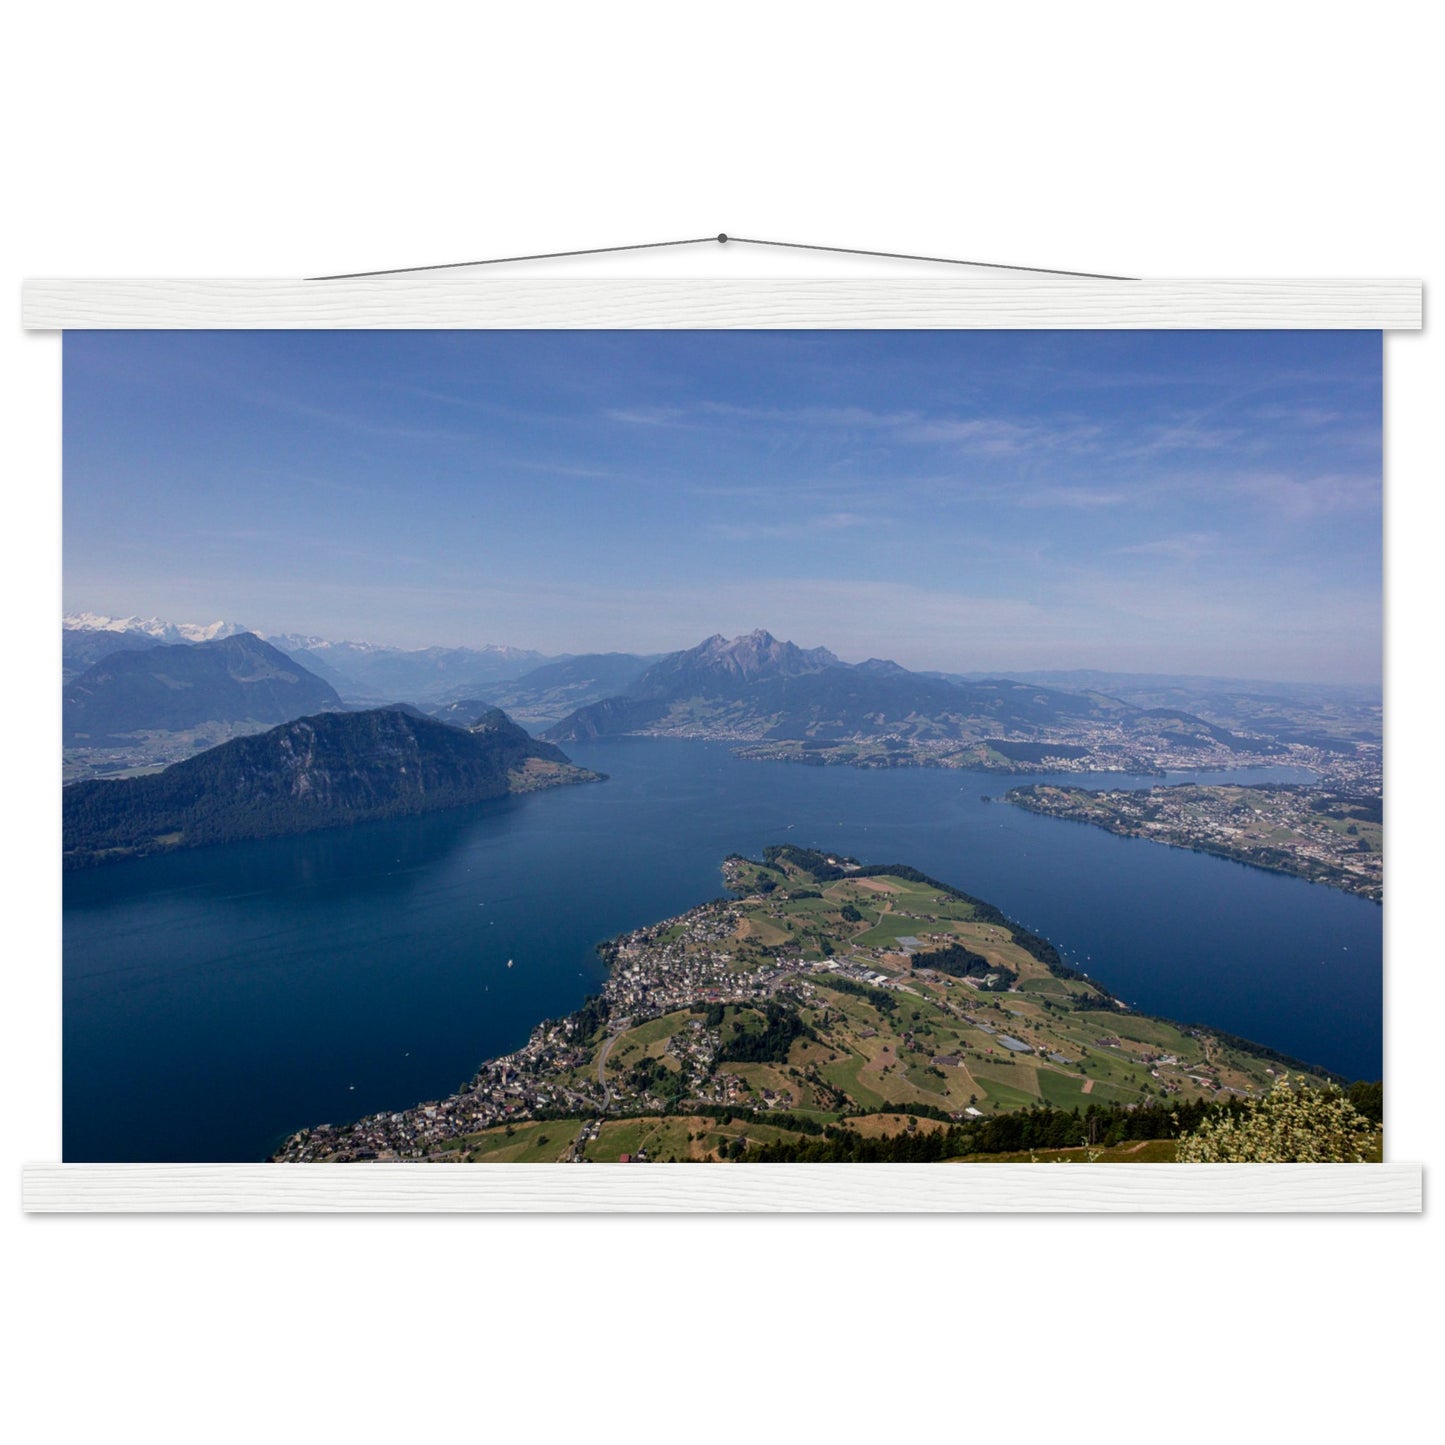 Central Switzerland Poster: Breathtaking view over Lake Lucerne Premium poster with wooden bars